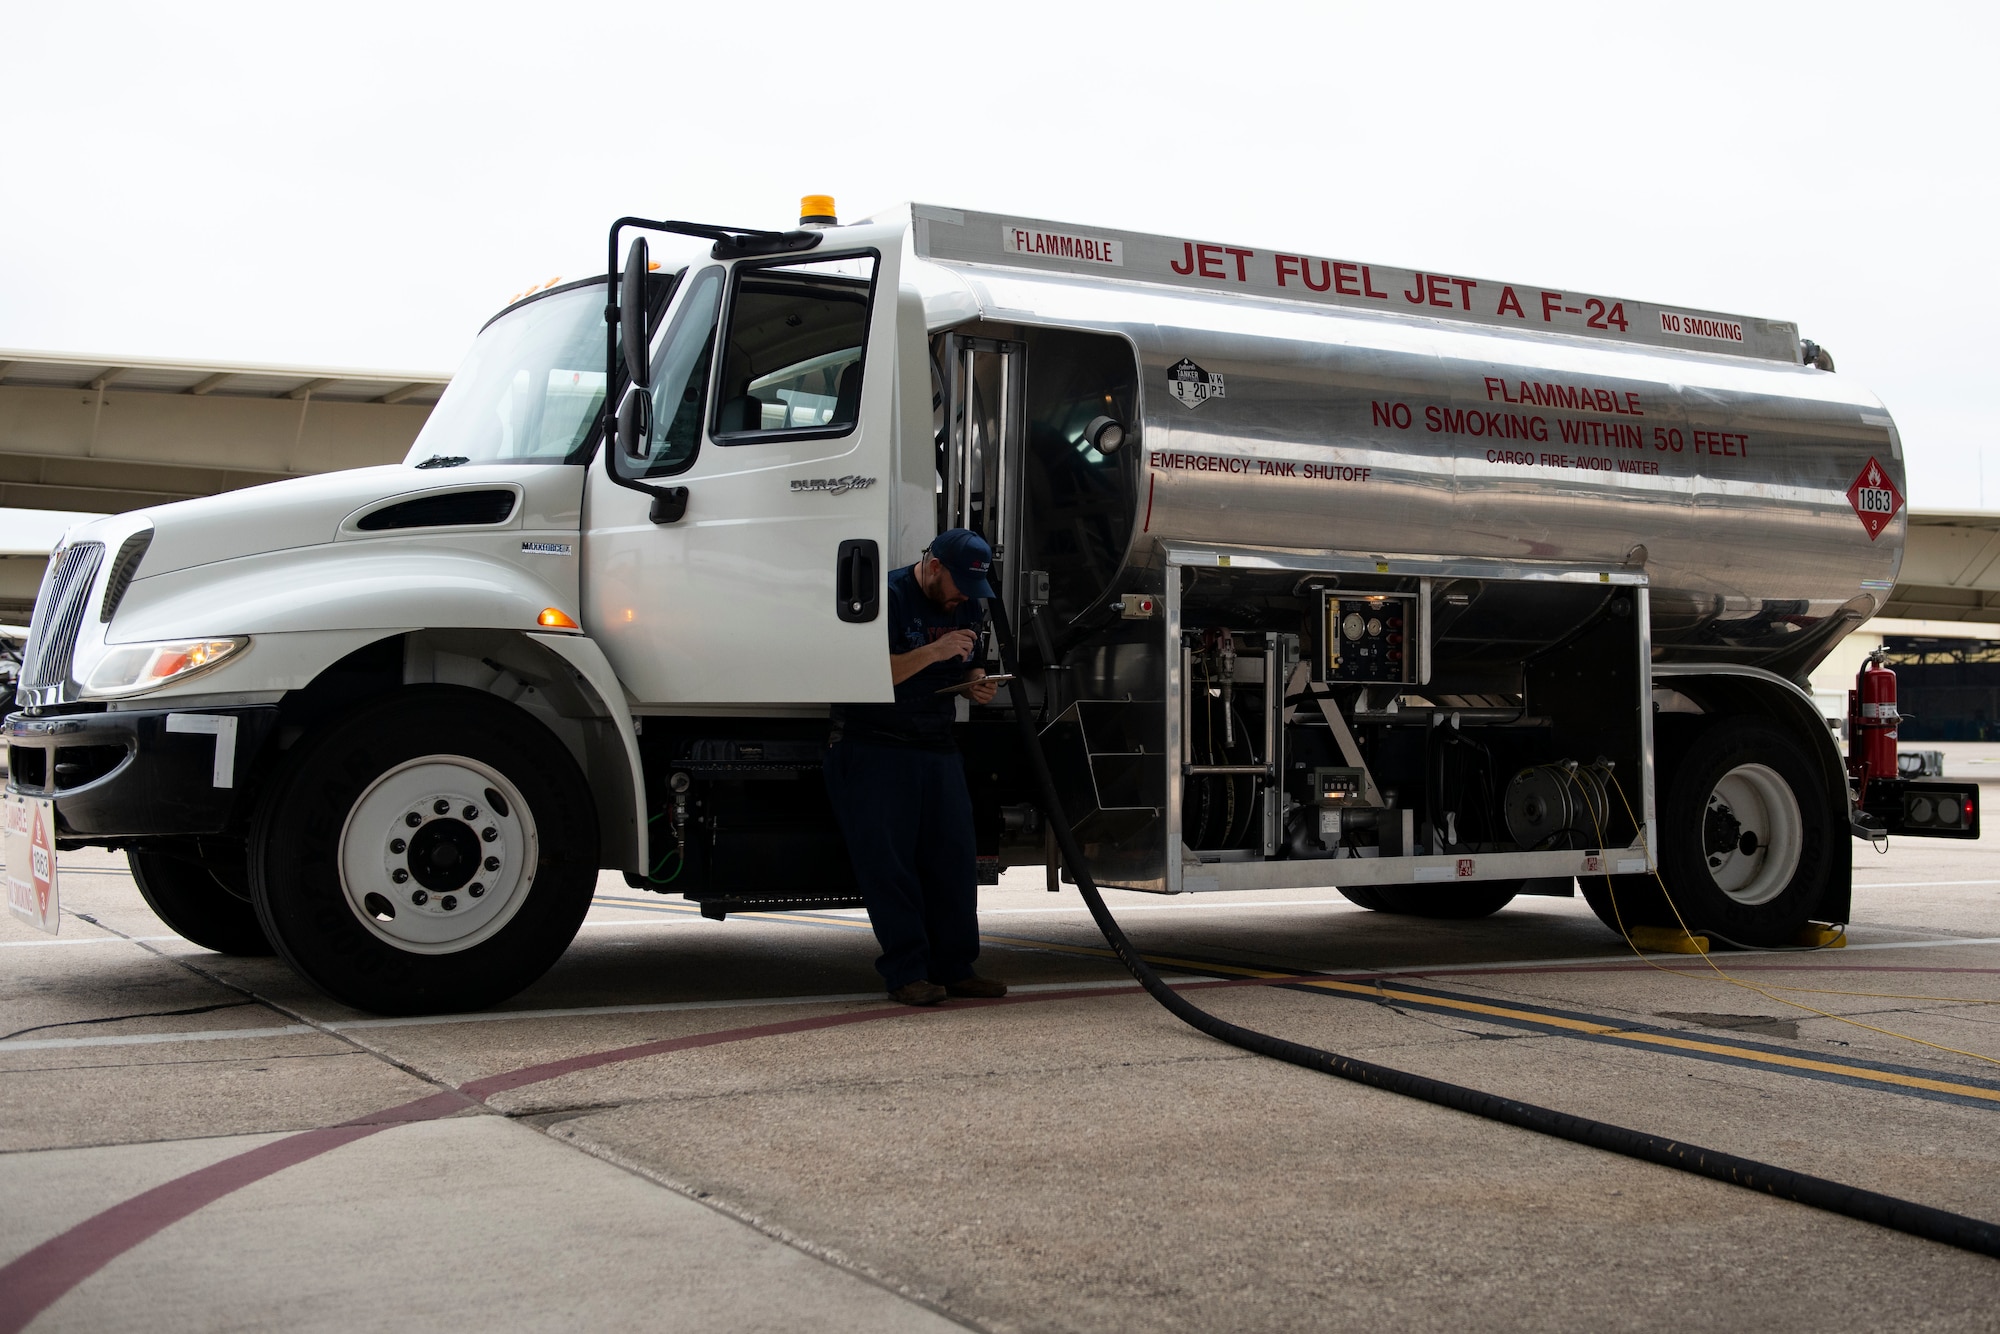 Rudy Losoya, 47th Logistics Readiness Flight aircraft services, operates a 3K commercial refueler on the flight line, on Nov. 9, 2020, Laughlin Air Force Base, Texas. This vehicle saves up to a minute on the fueling process per plane. (U.S. Air Force photo by Airman 1st Class David Phaff)